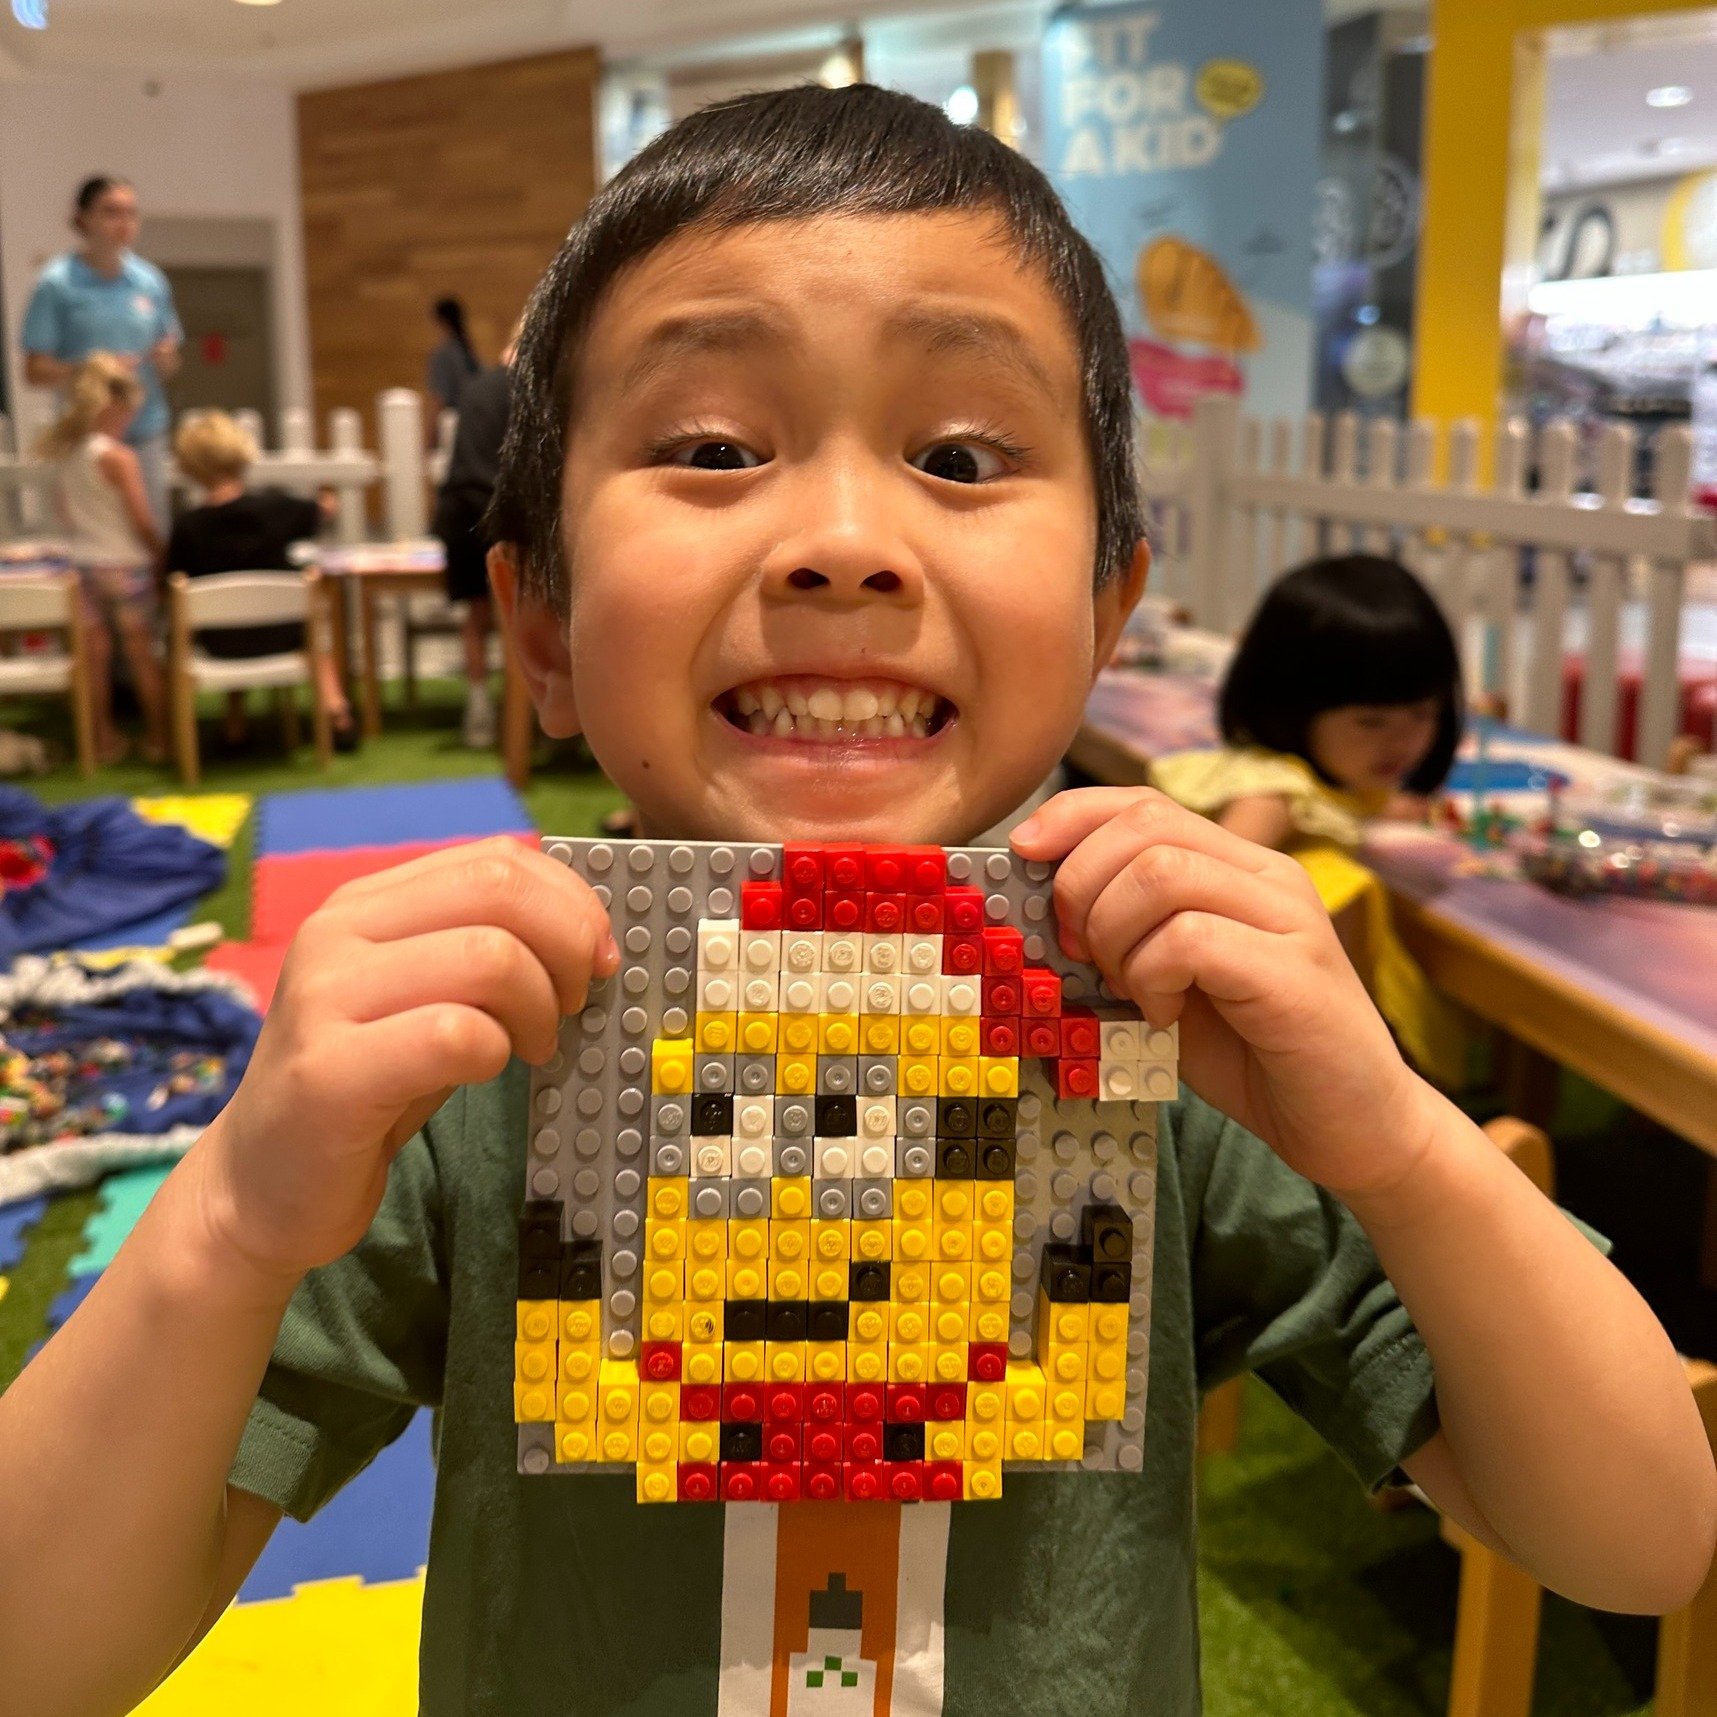 Our FREE school holiday activities - building with lego bricks - starts today. Join us on ground floor between 12-3pm for some super kid's fun!

 #schoolholidayactivitiesforkids #mandarincentre #funthingstodochatswood #mandarincentrekids #chatswoodth